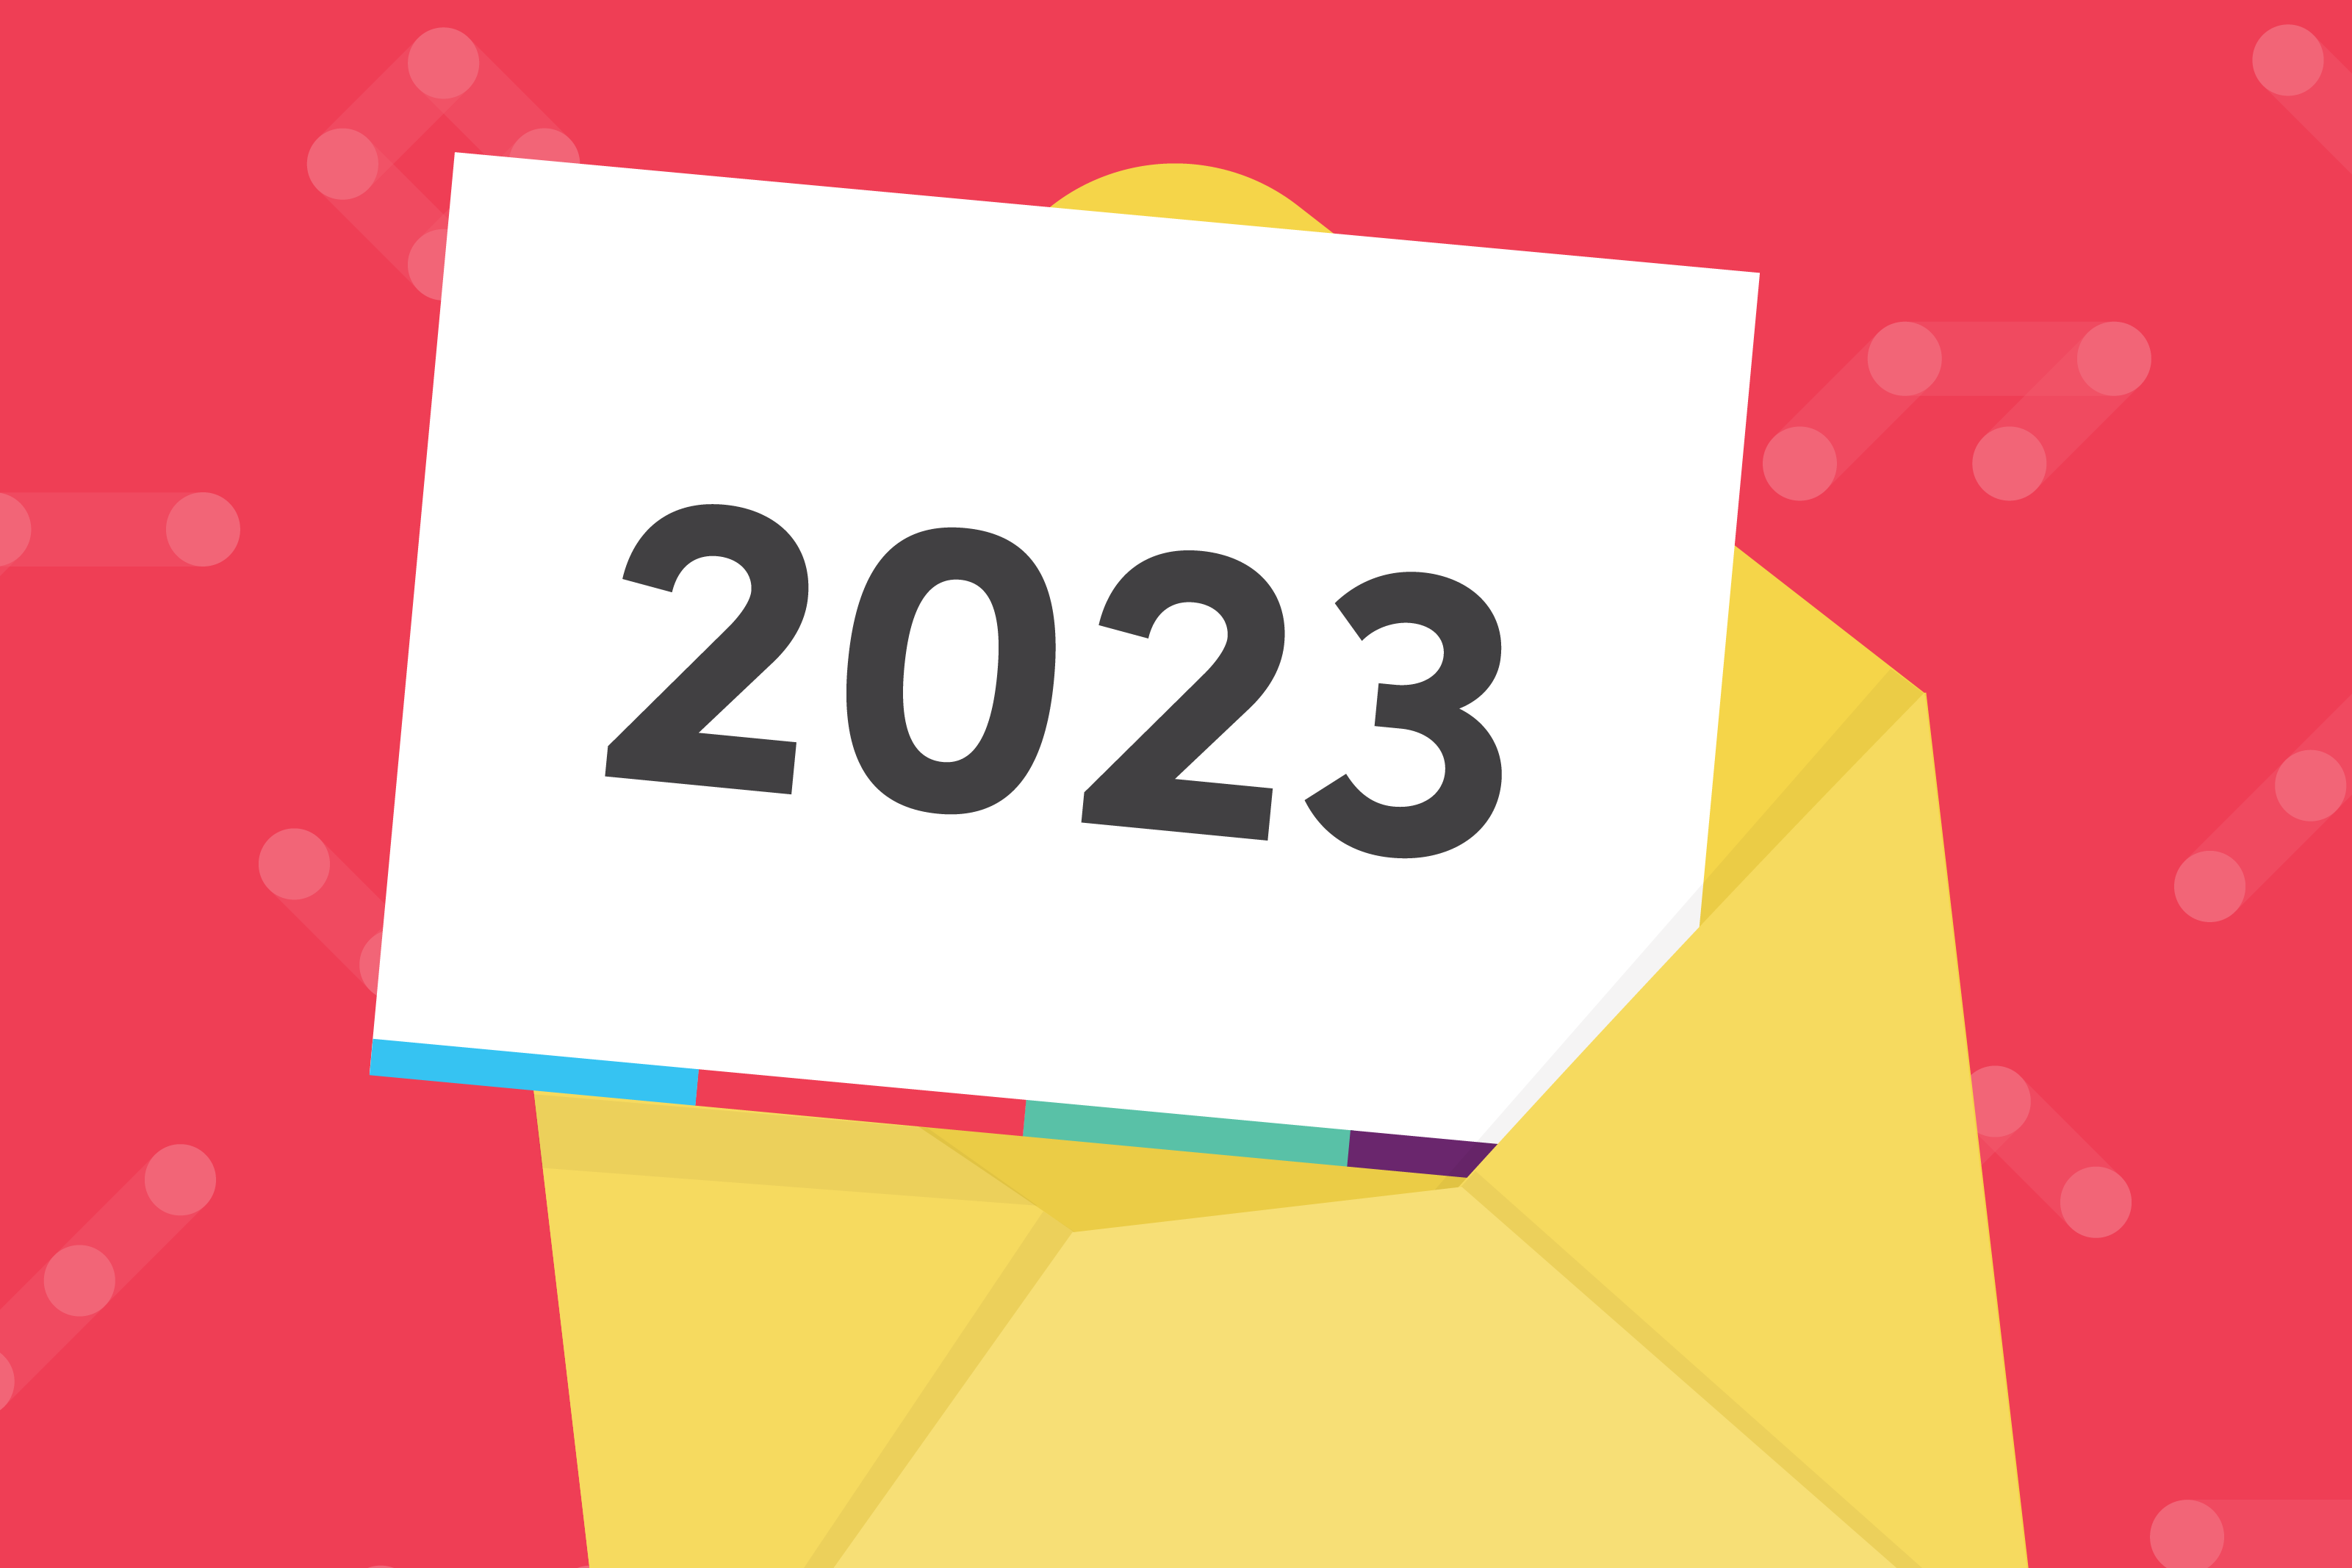 Red Iterable background with illustrated yellow envelope. Out of the envelope is a piece of paper that says 2023 on it.